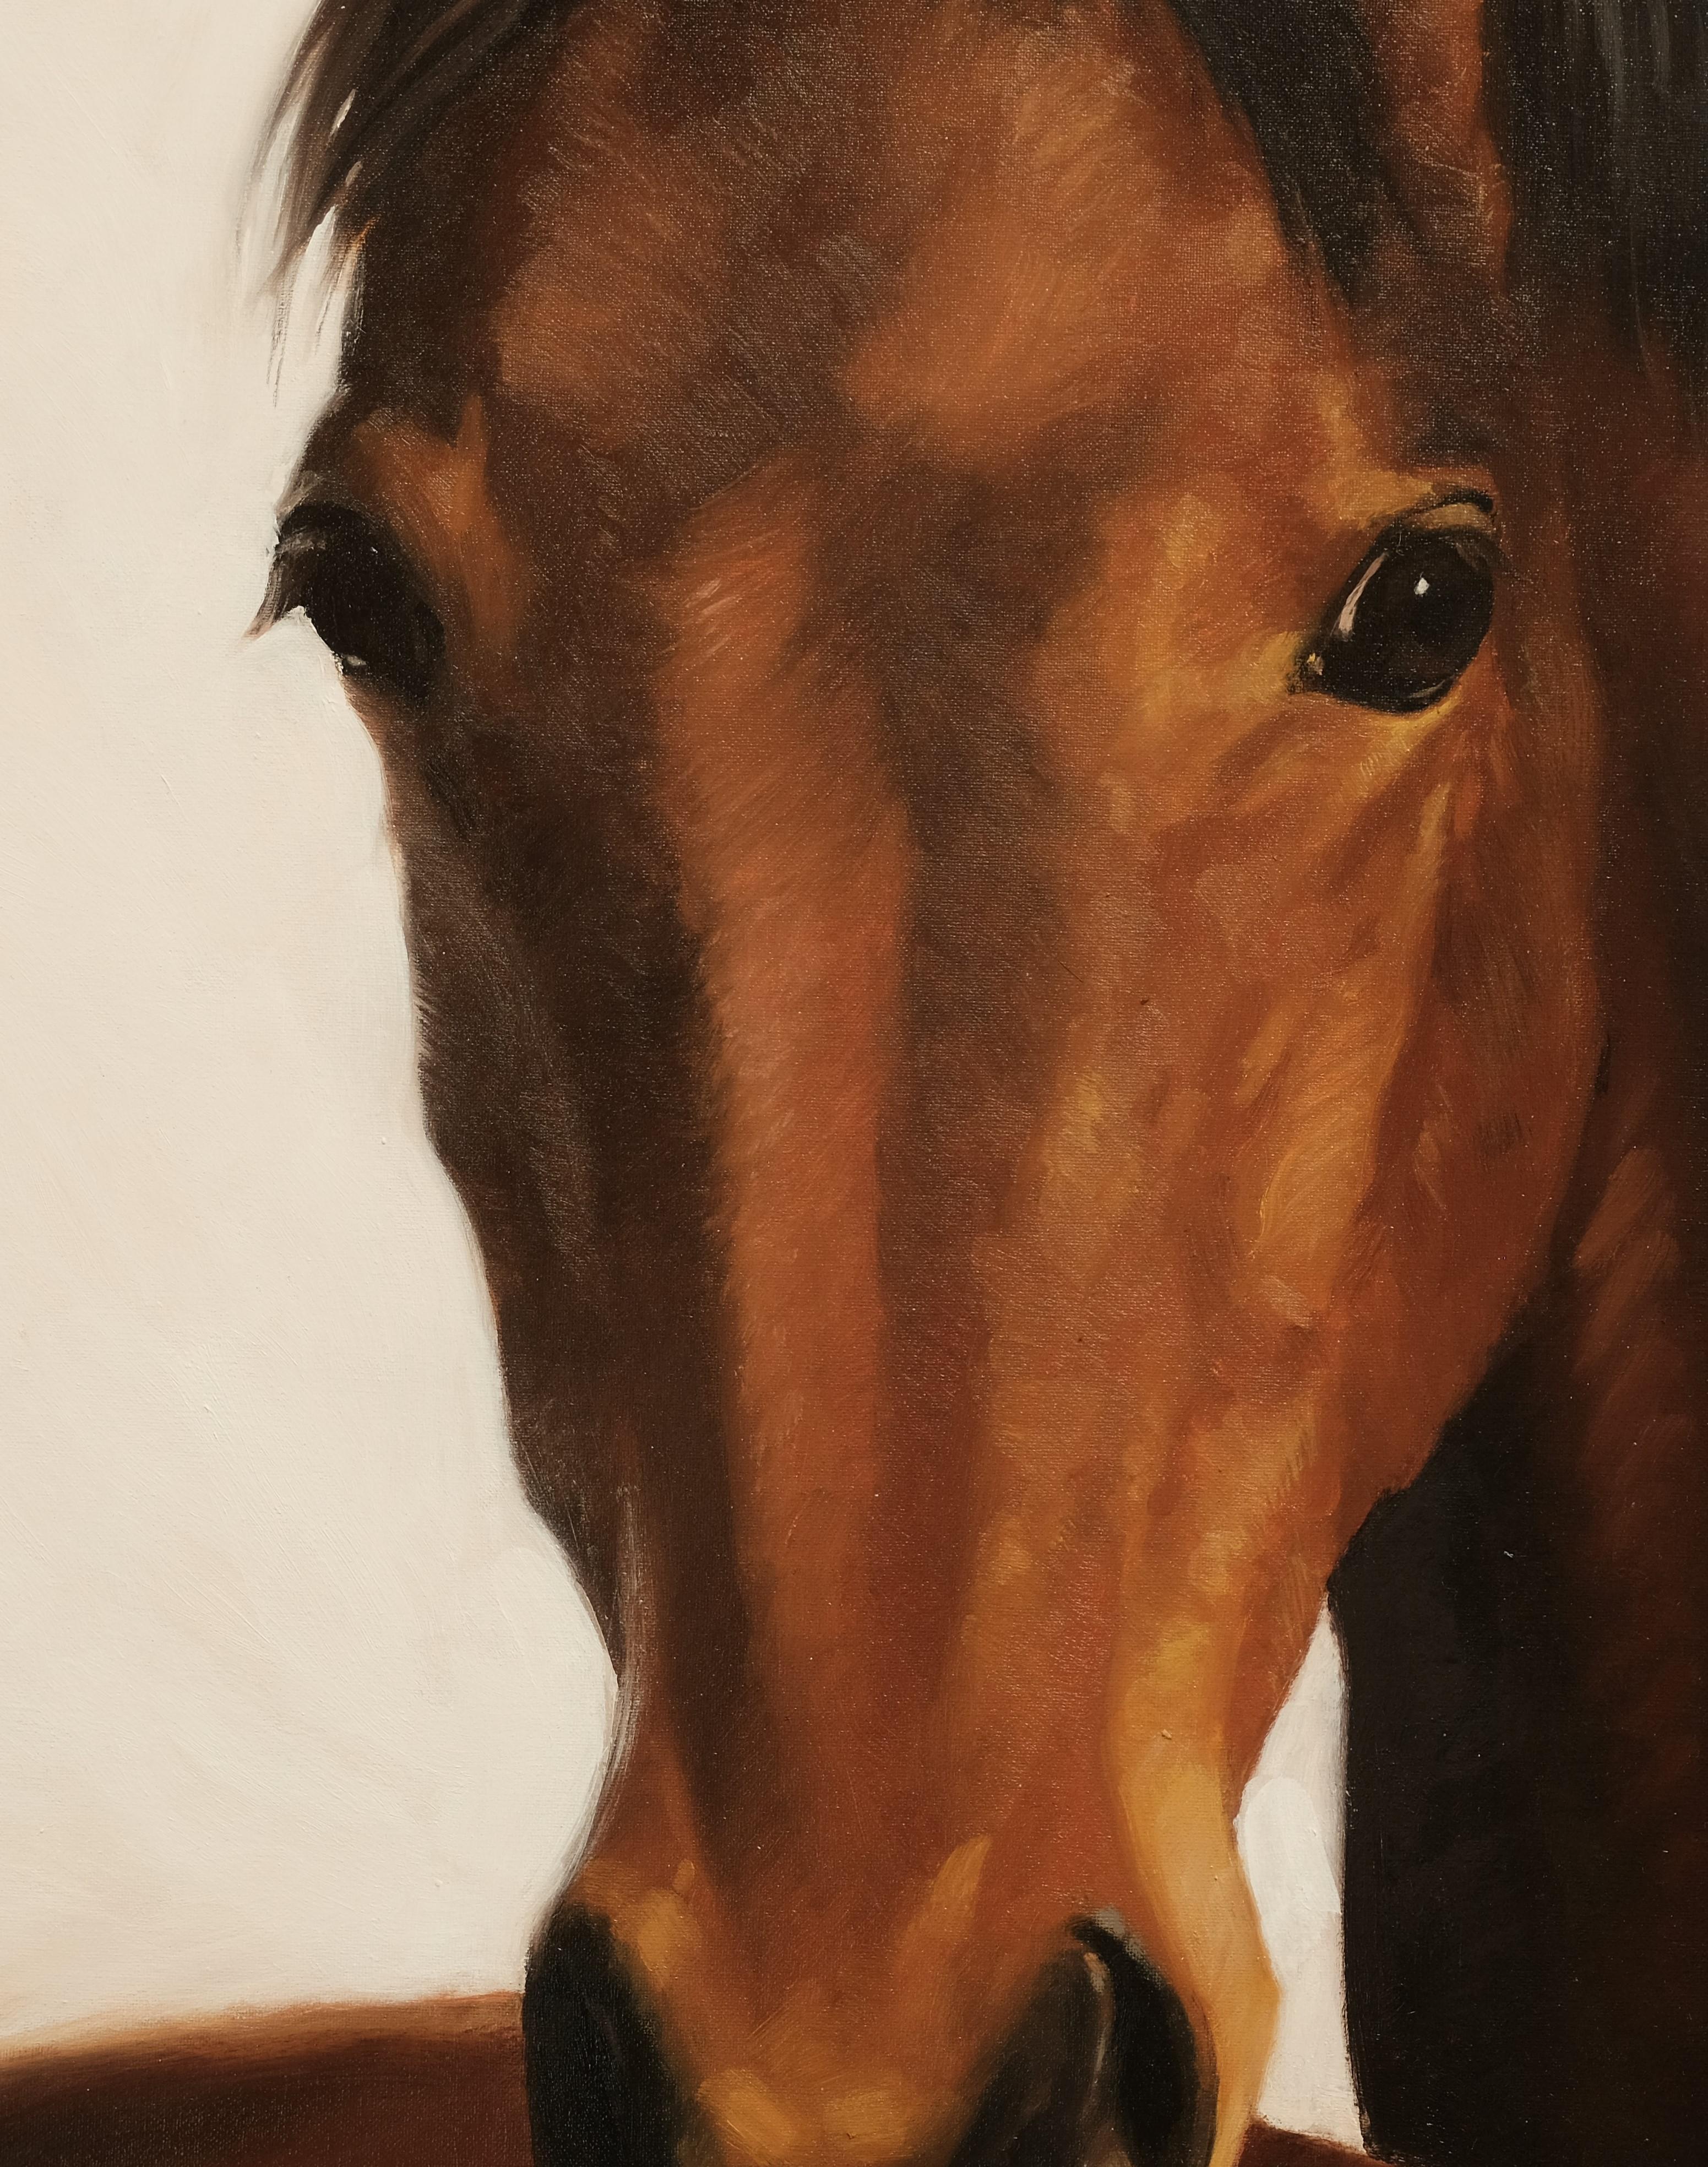 Foals,Horses, Thoroughbred,Brown, white,
Two works cm. 110 x 110 together 220 x 110 ,inch 86,61 x 43,30 

Luisa Albert was born in Turin, Italy where she currently lives and works.
In 1989 she enrolled at the Istituto Europeo di Design in Milan and